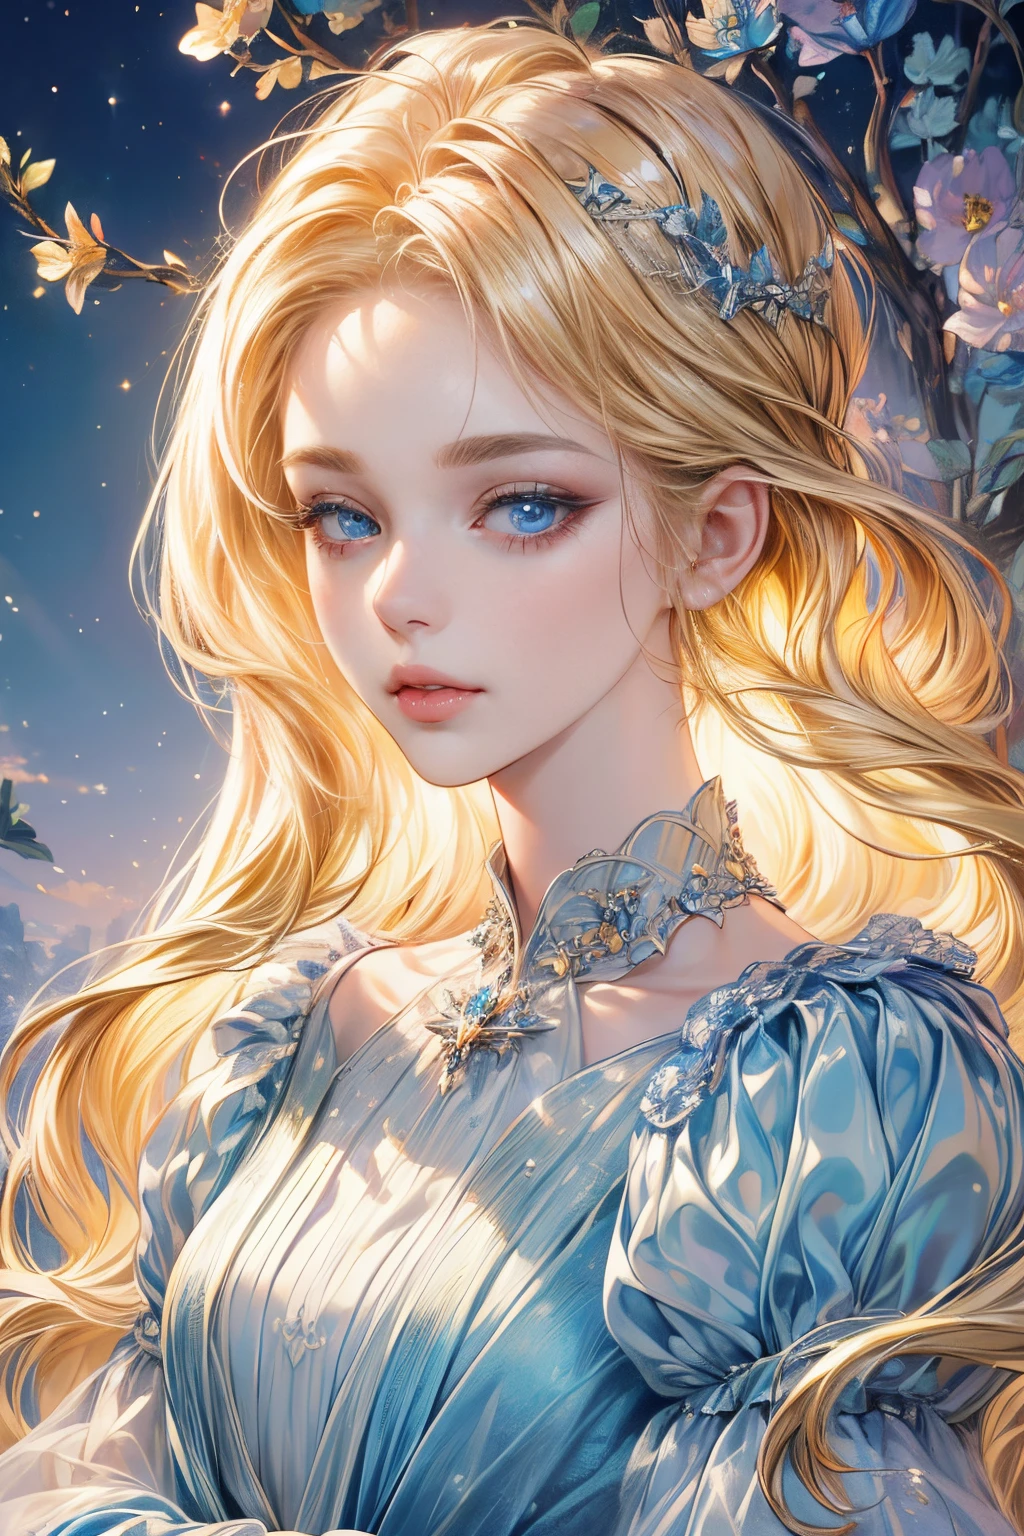 (best quality:1.4), (masterpiece:1.4), ultra-high resolution, 8K, CG, (exquisite:1.2), upper body, , Thumbelina, little princess, blue taffeta court dress, forest background, detailed facial features, blonde hair, almond-shaped eyes, detailed eye makeup, long eyelashes, blue eyes with a starry gaze, exquisite lip details, soft and harmonious style